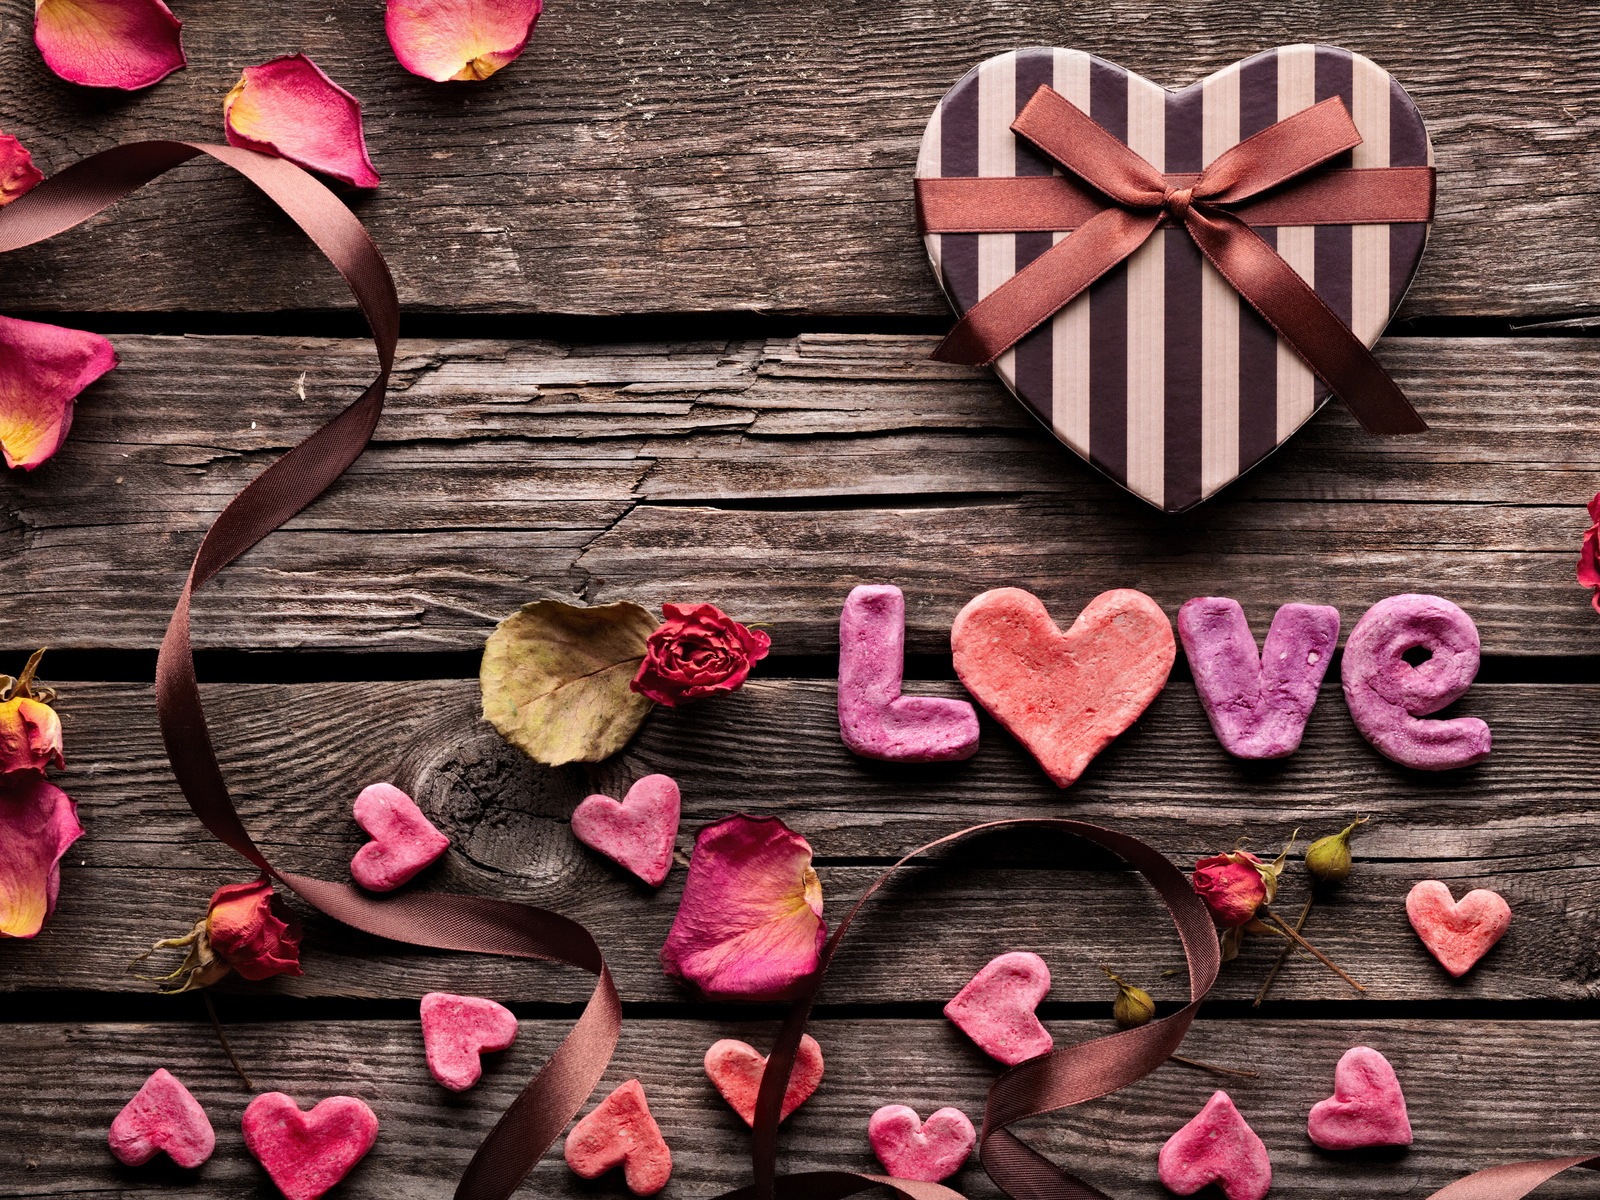 Warm and romantic Valentine's Day HD wallpapers #16 - 1600x1200